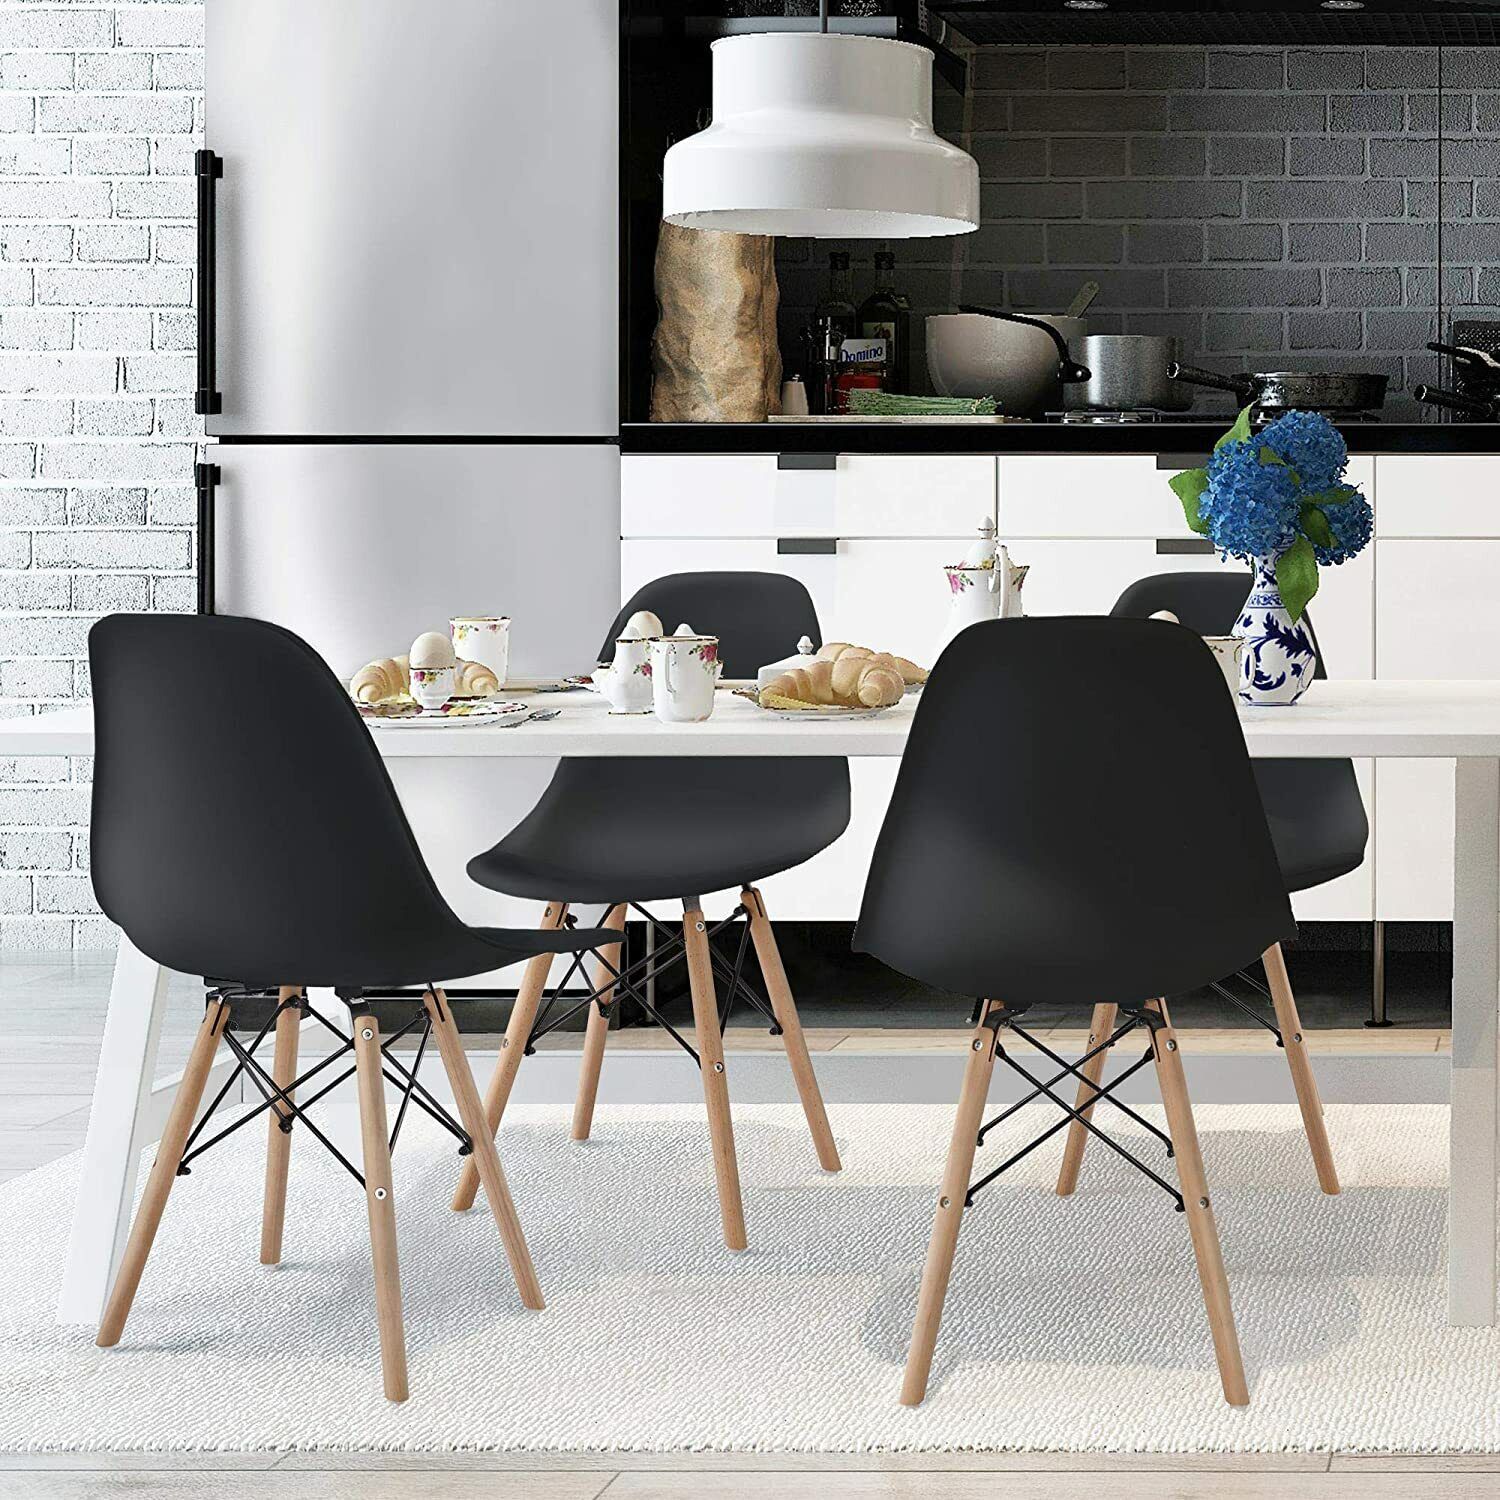 Set of 4 Dining Chairs Plastic Chair for Home Kitchen Dining Bedroom Living Room Fetines Does Not Apply